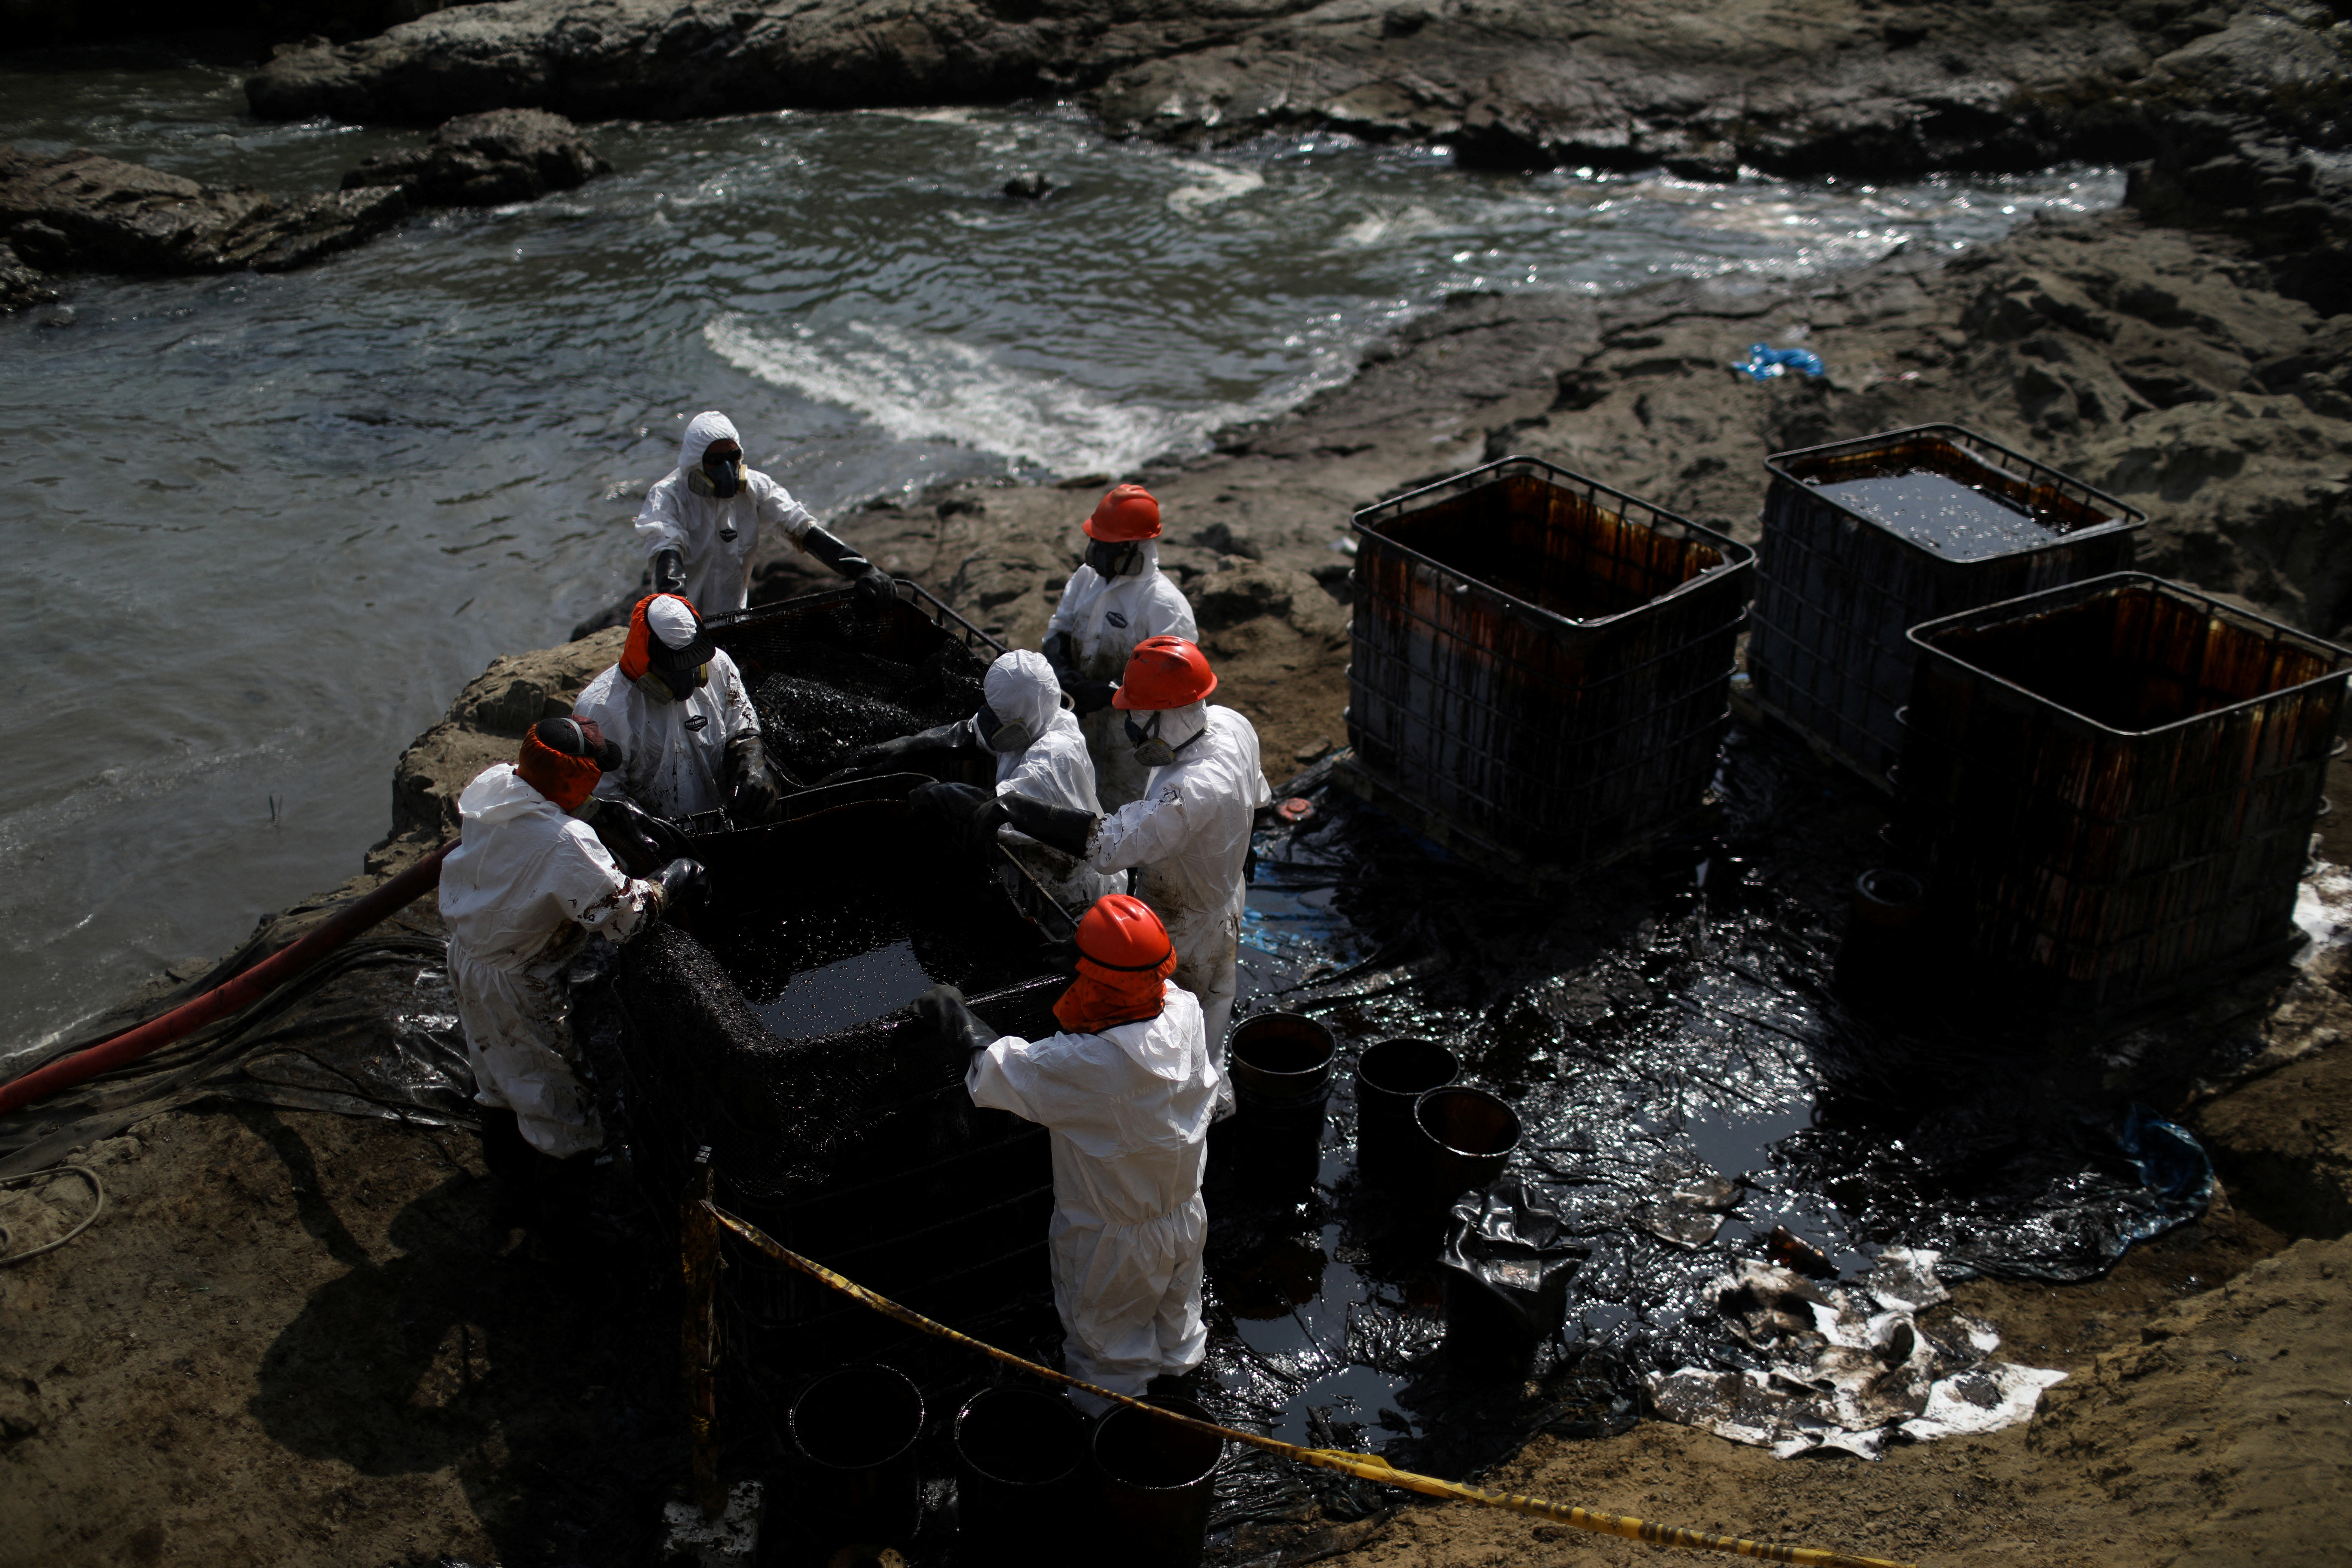 Workers clean up an oil spill following an underwater volcanic eruption, in Ventanilla